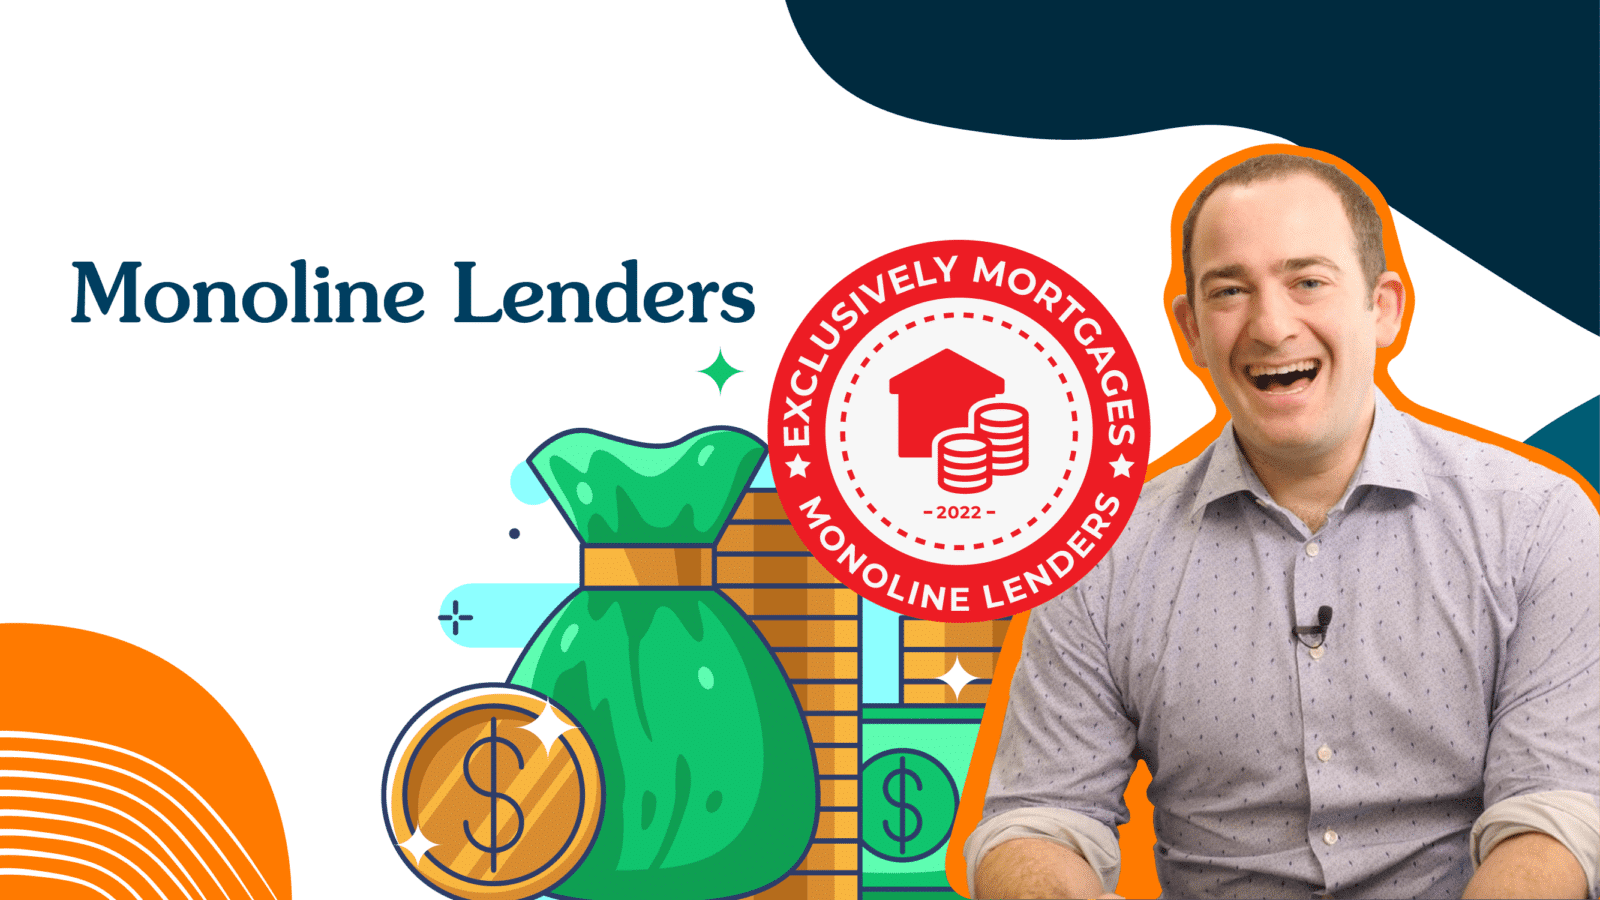 Get informed about monoline lenders and increase your mortgage options. Understand non-bank lenders and make better borrowing decisions.